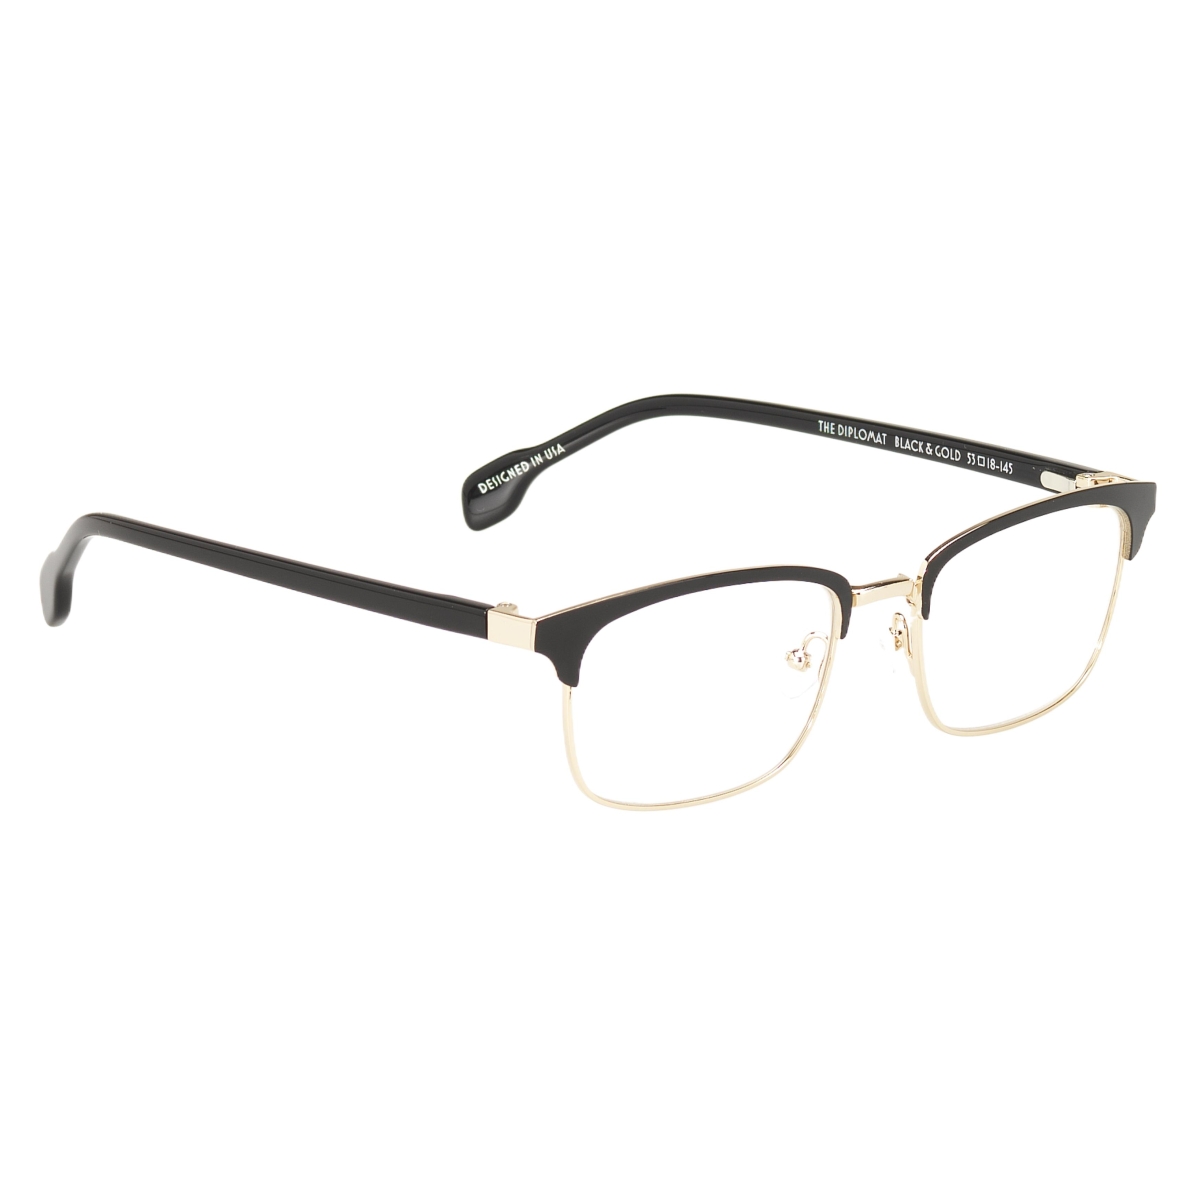 Sugar Specs - The Diplomat 02 Black and Gold